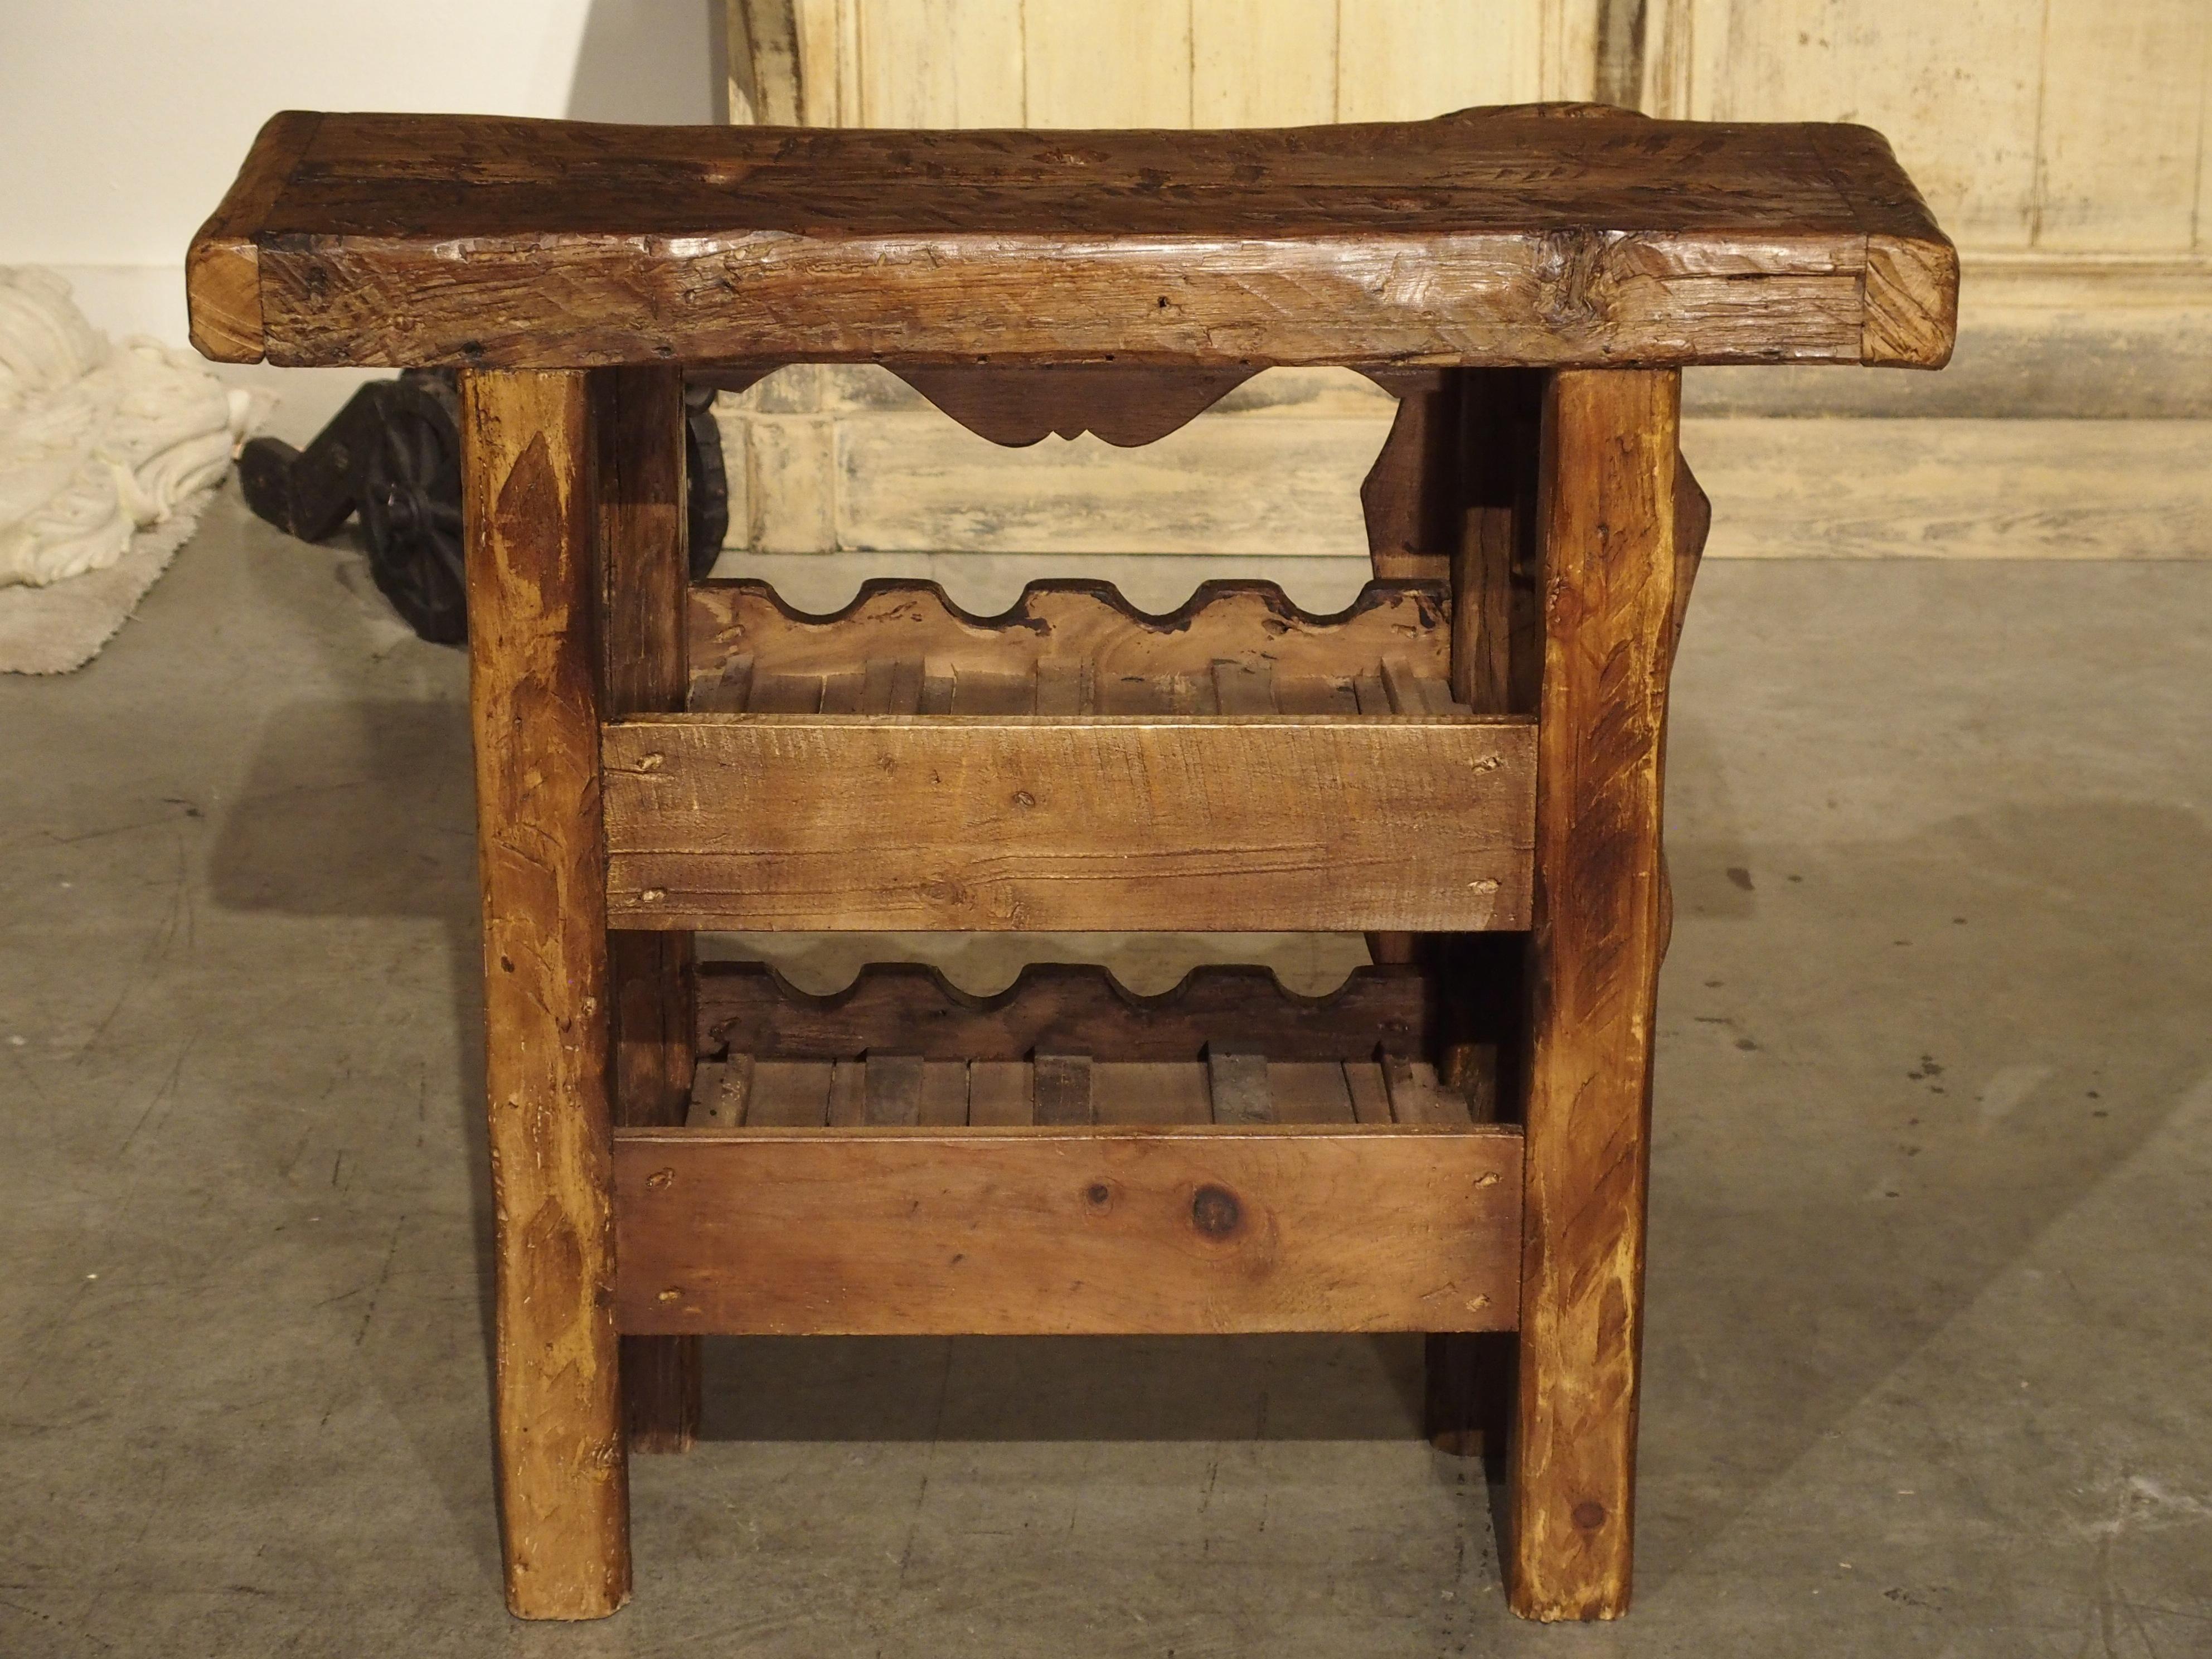 This antique French workbench has been reconfigured into a wine carrier with two rows of bottle holders beneath the thick wood top. There are a total of 8 holders for wine or champagne bottles.

The frontage of the top row reads, Petrus in block